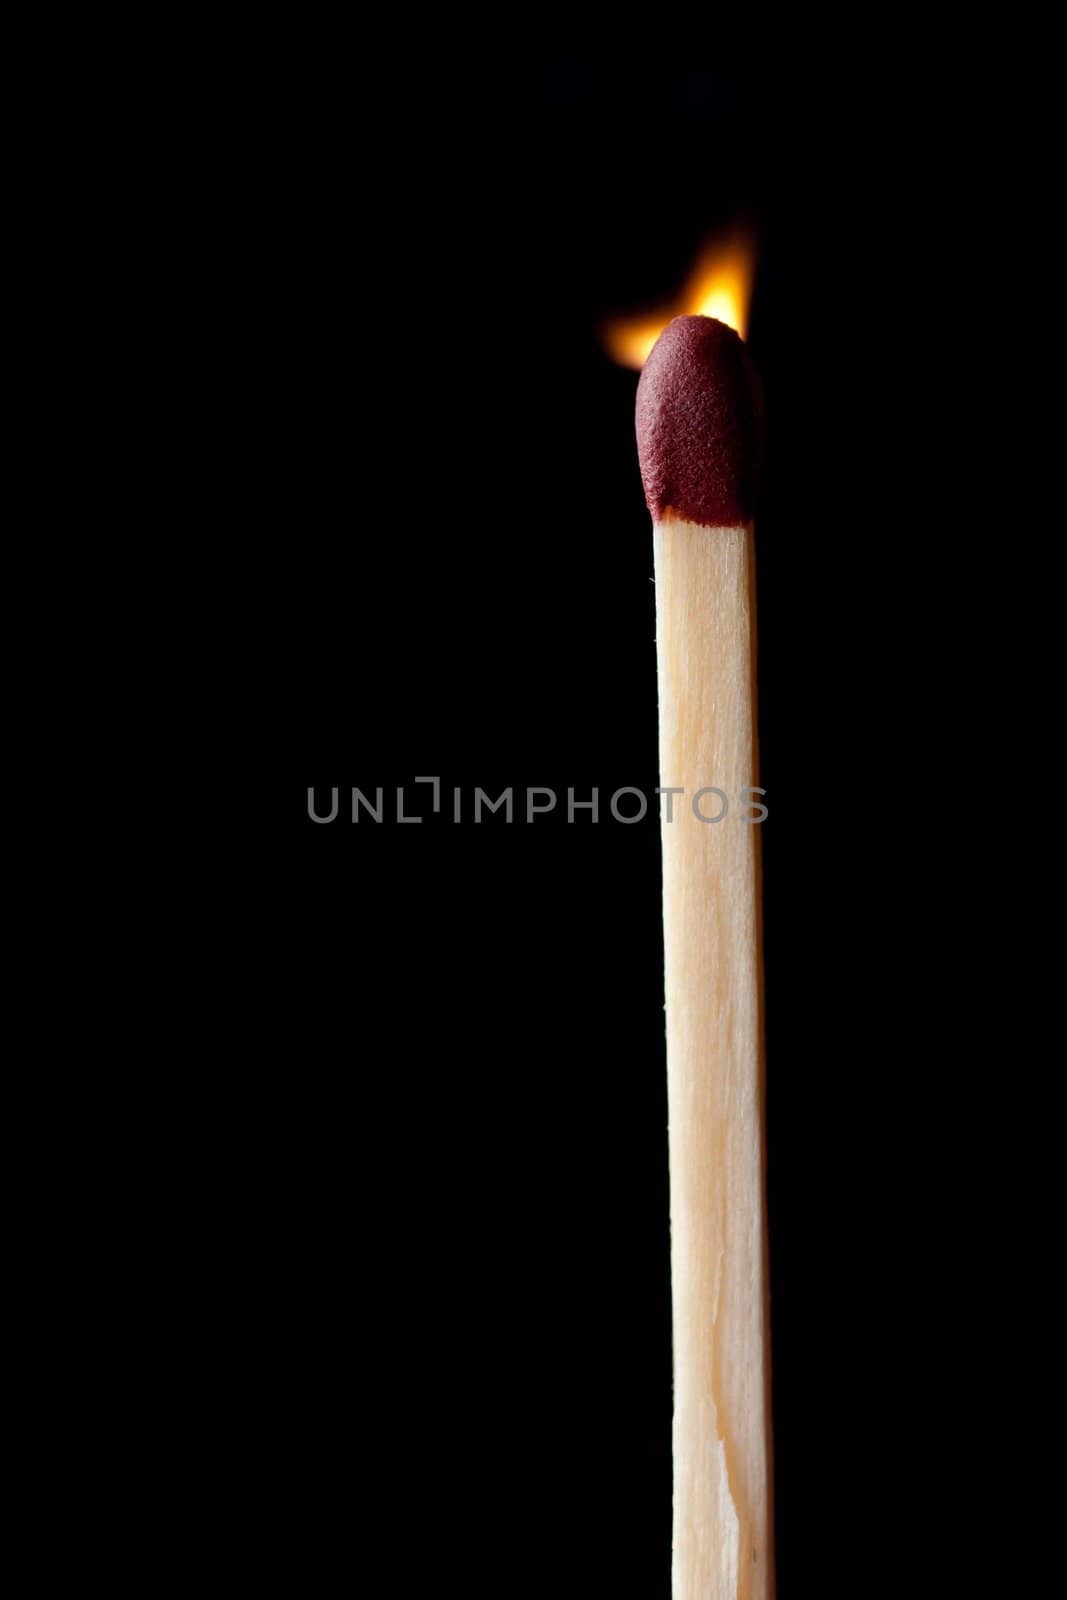 Close up of a match set on fire against a black background